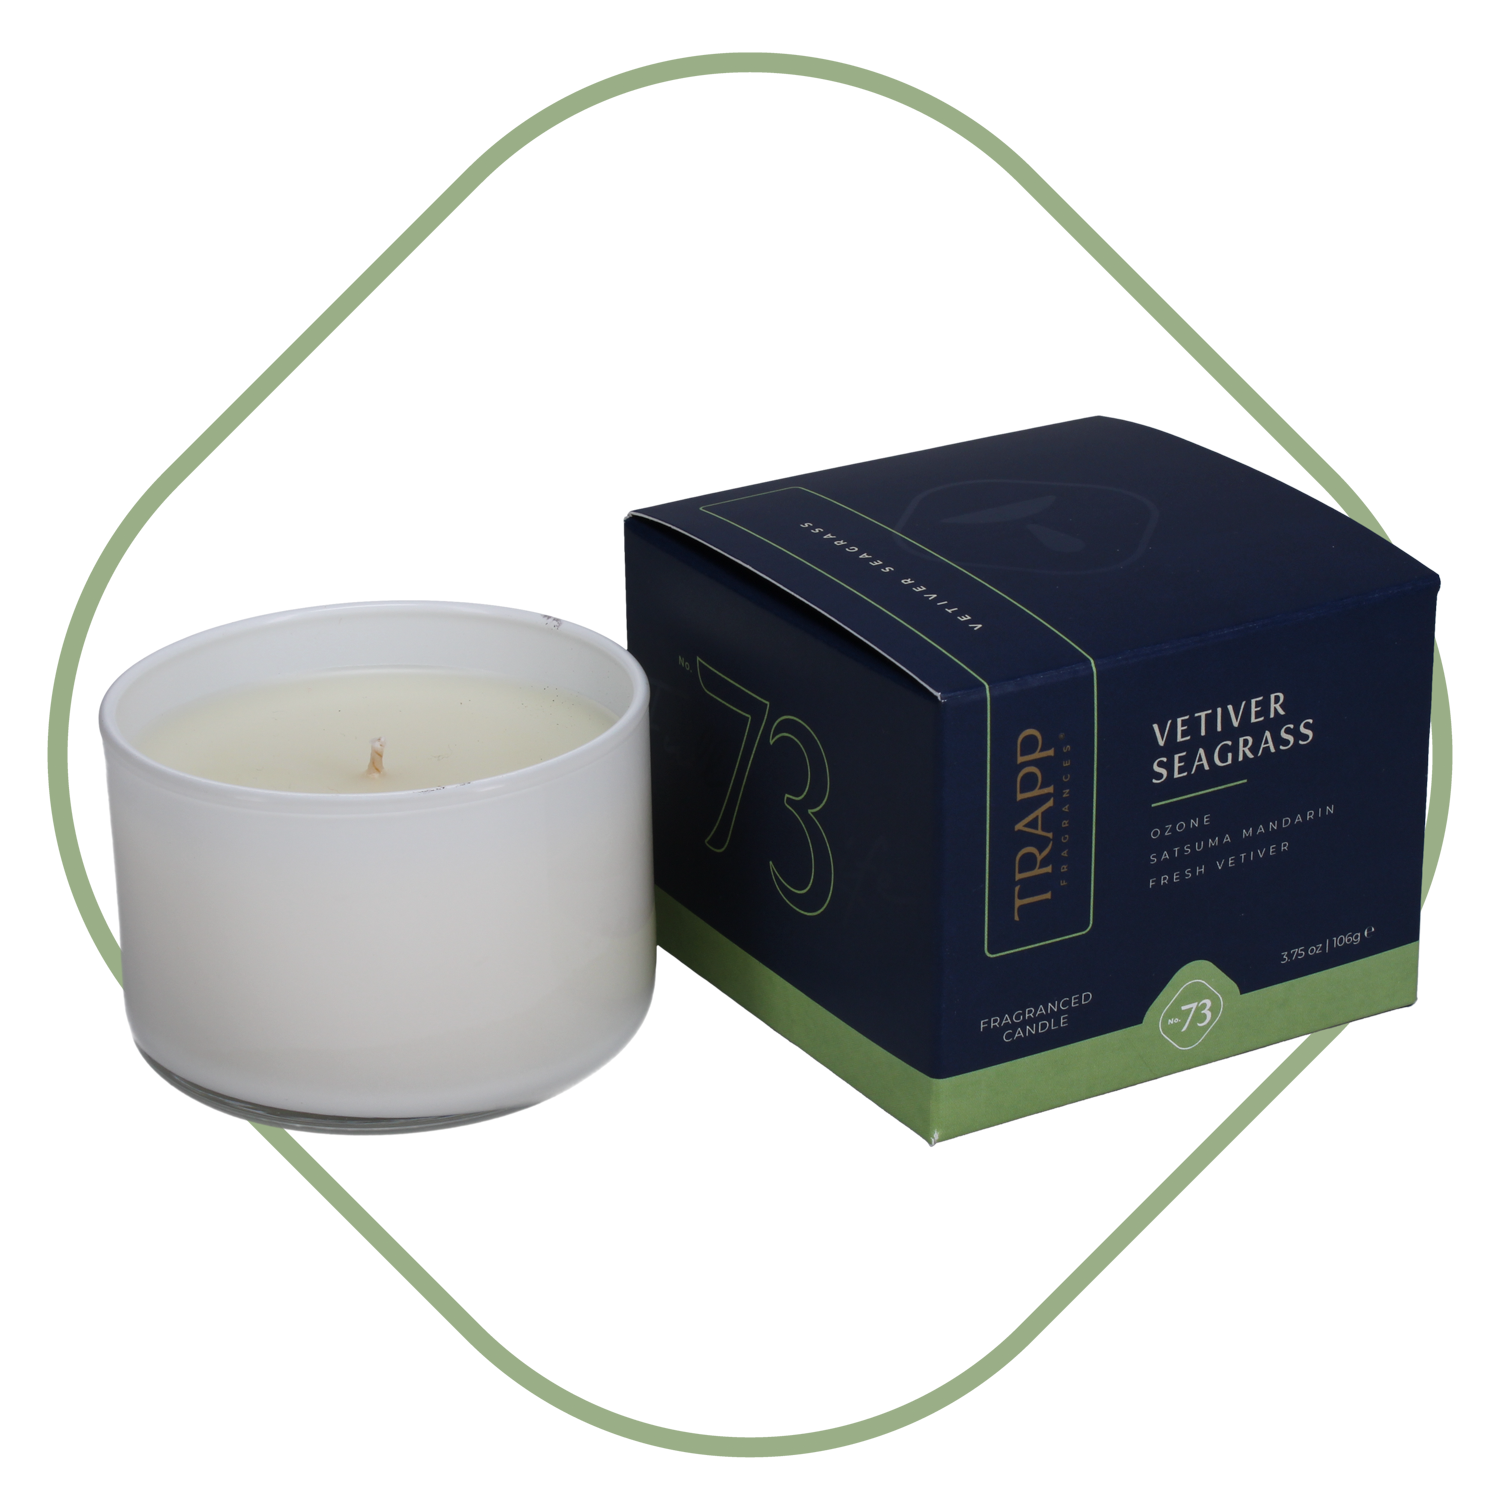 No. 73 Vetiver Seagrass 3.75 oz. Small Poured Candle